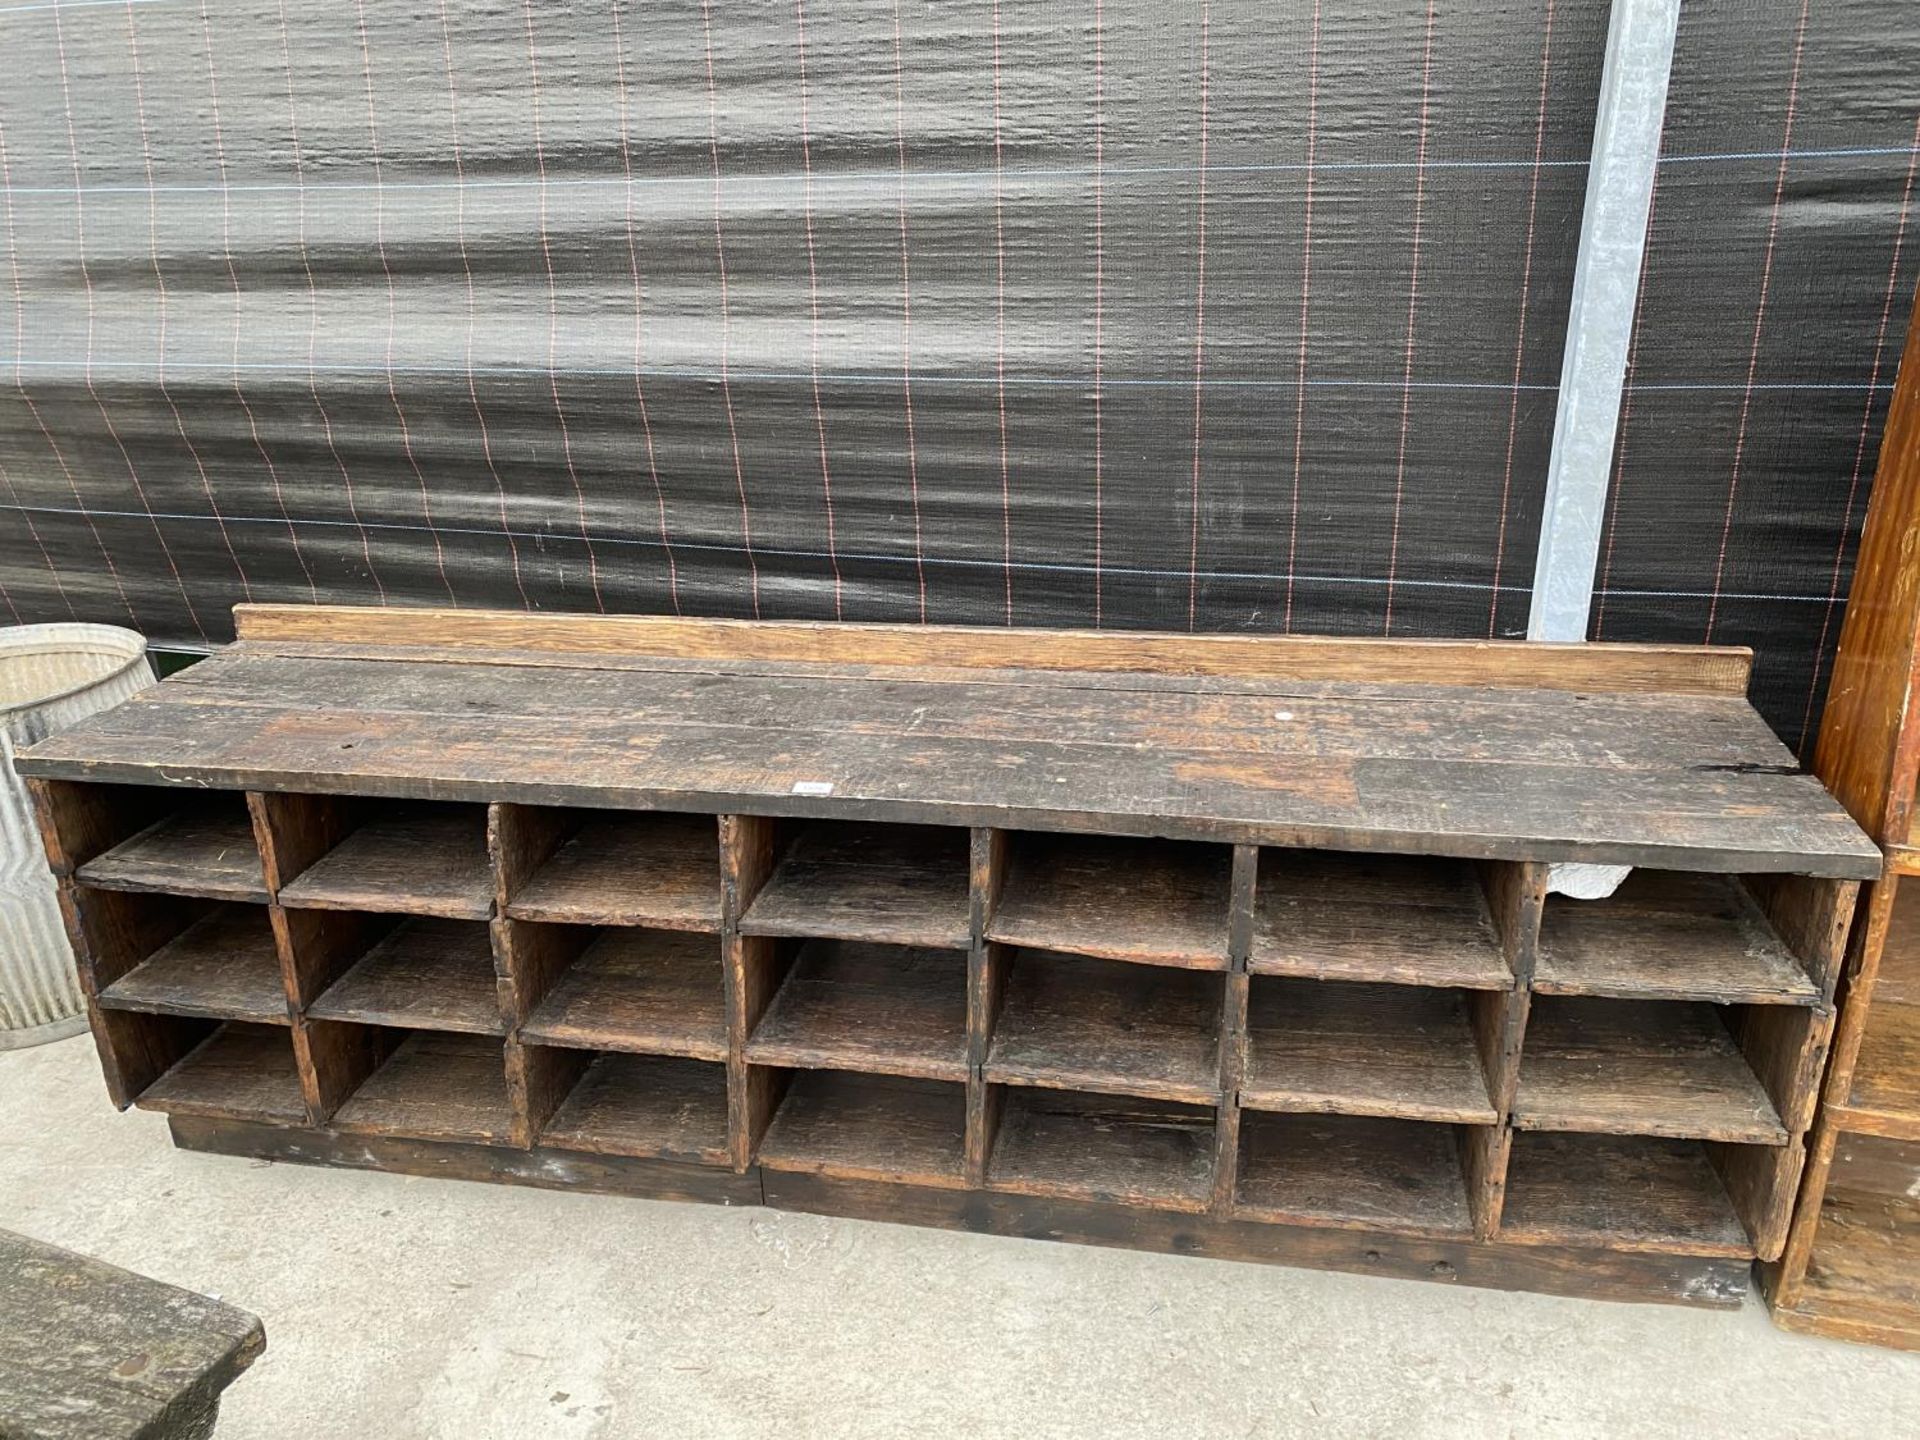 A VINTAGE WOODEN 21 SECTION PIGEON HOLE STORAGE BENCH